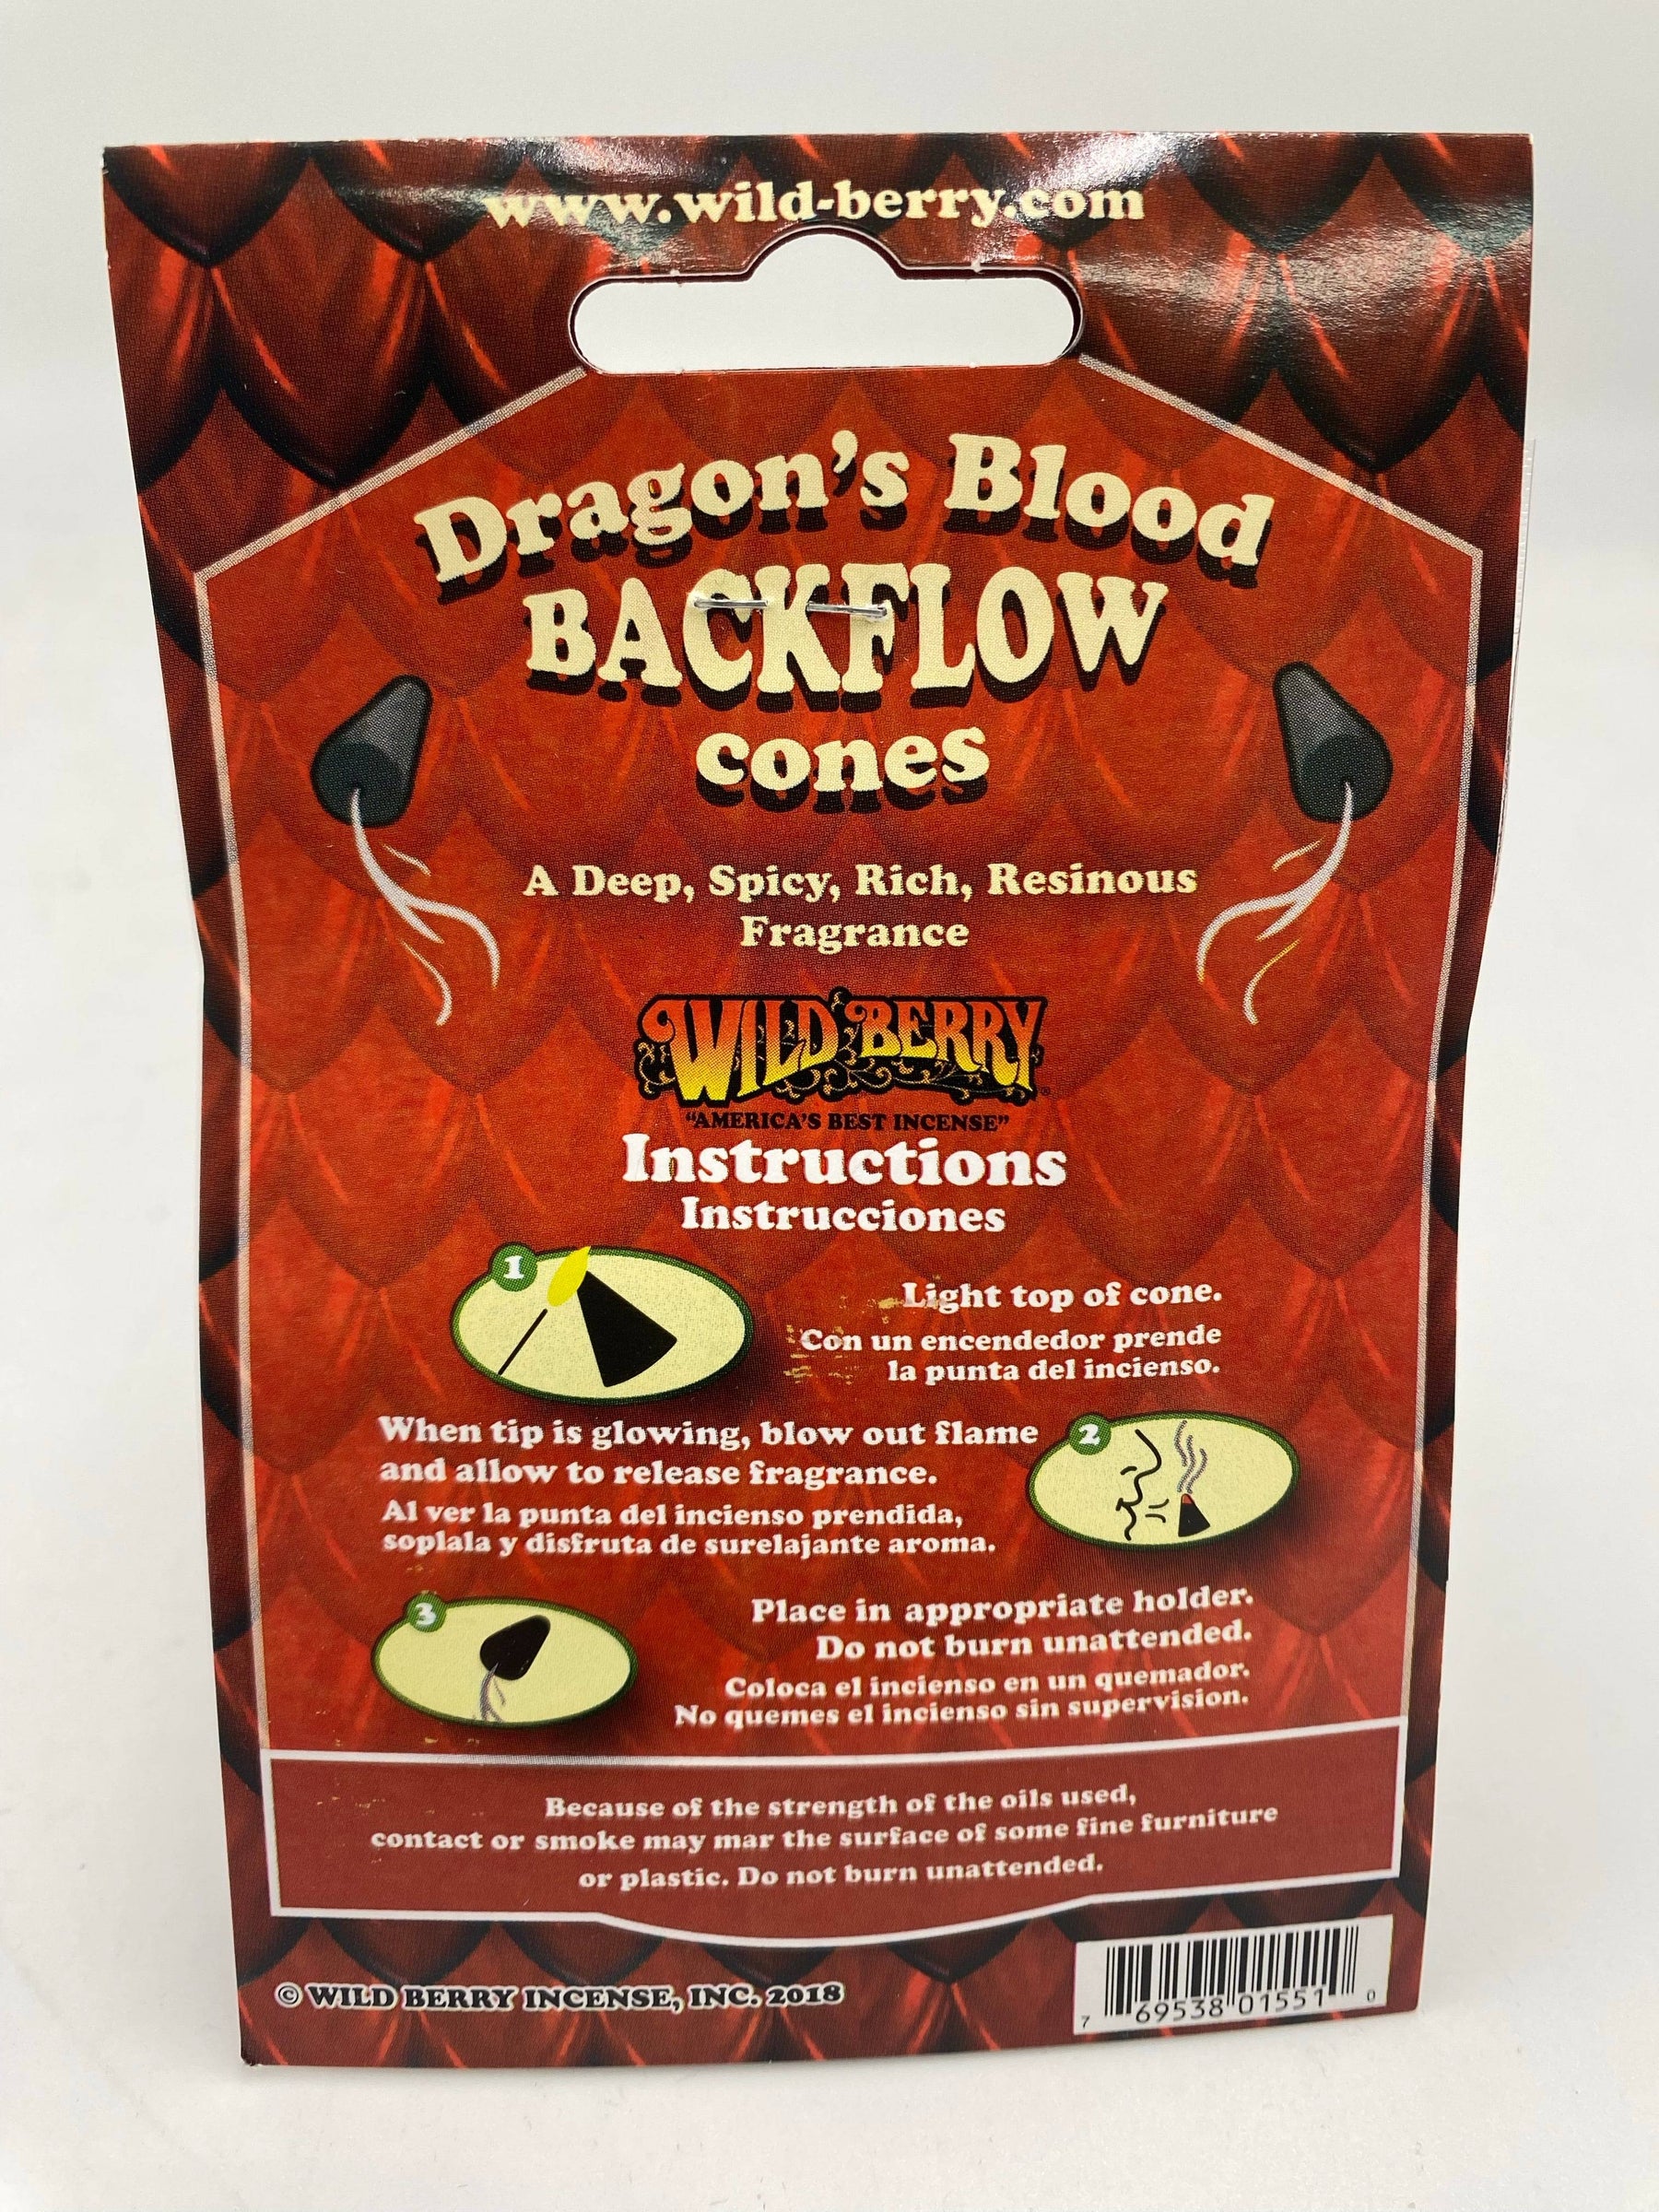 WILDBERRY BACK FLOW CONES DRAGON'S BLOOD 6 CT BAG